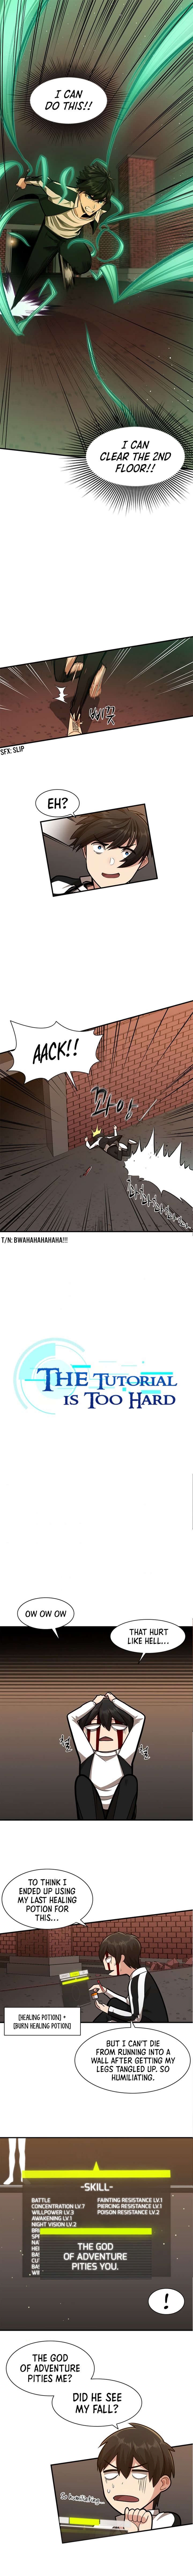 the_tutorial_is_too_hard_14_1